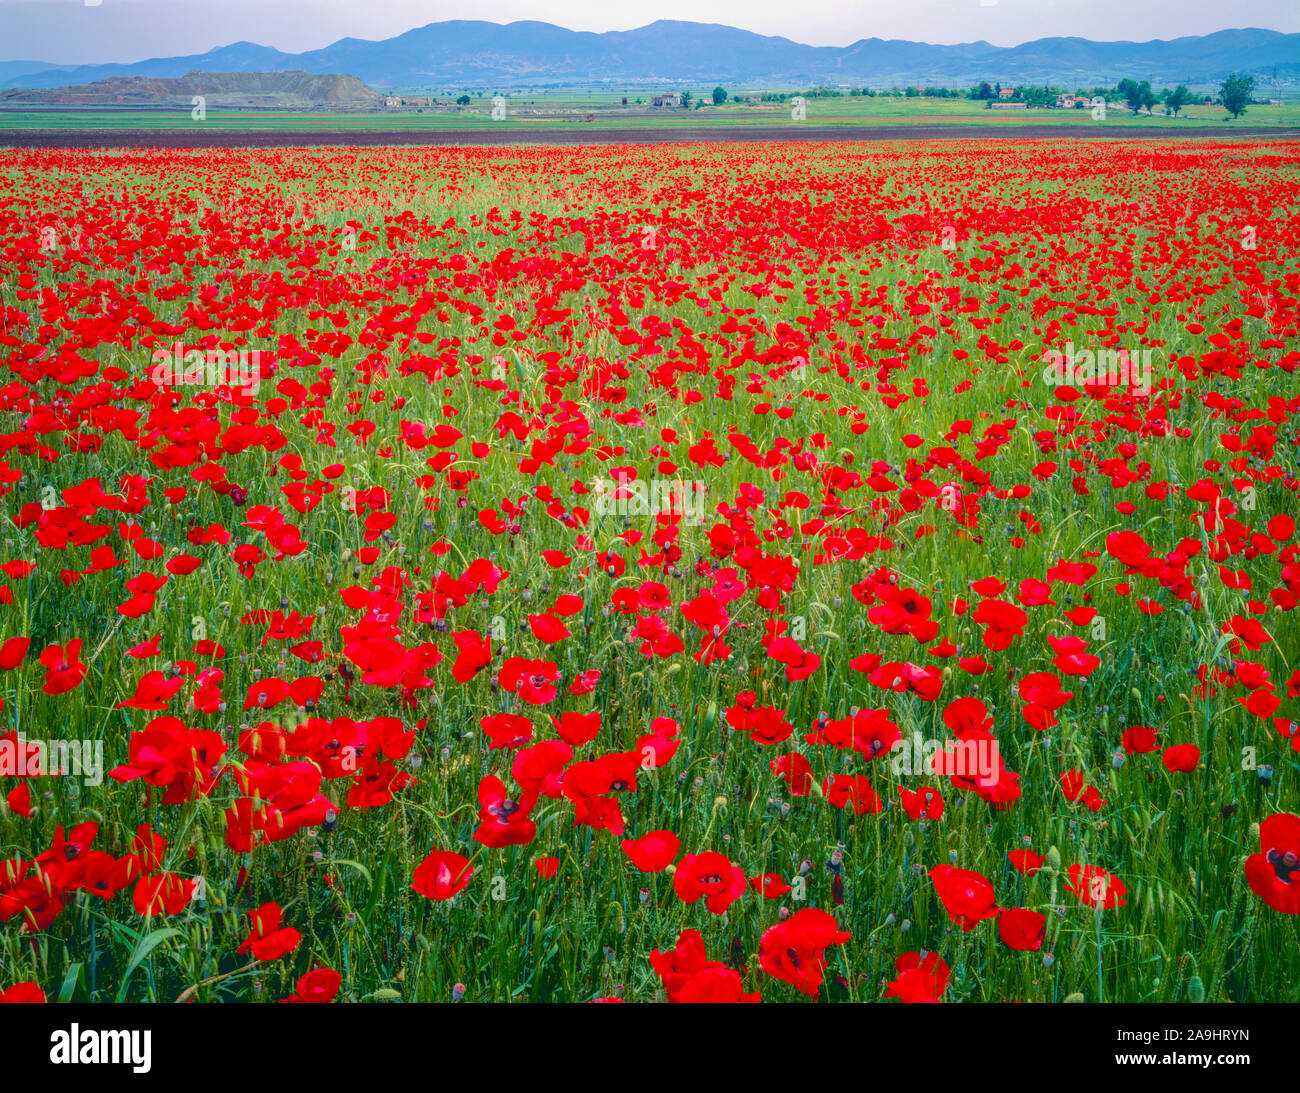 Poppies in central Greece, Thessaly Regio, PIndos Mountains Stock Photo